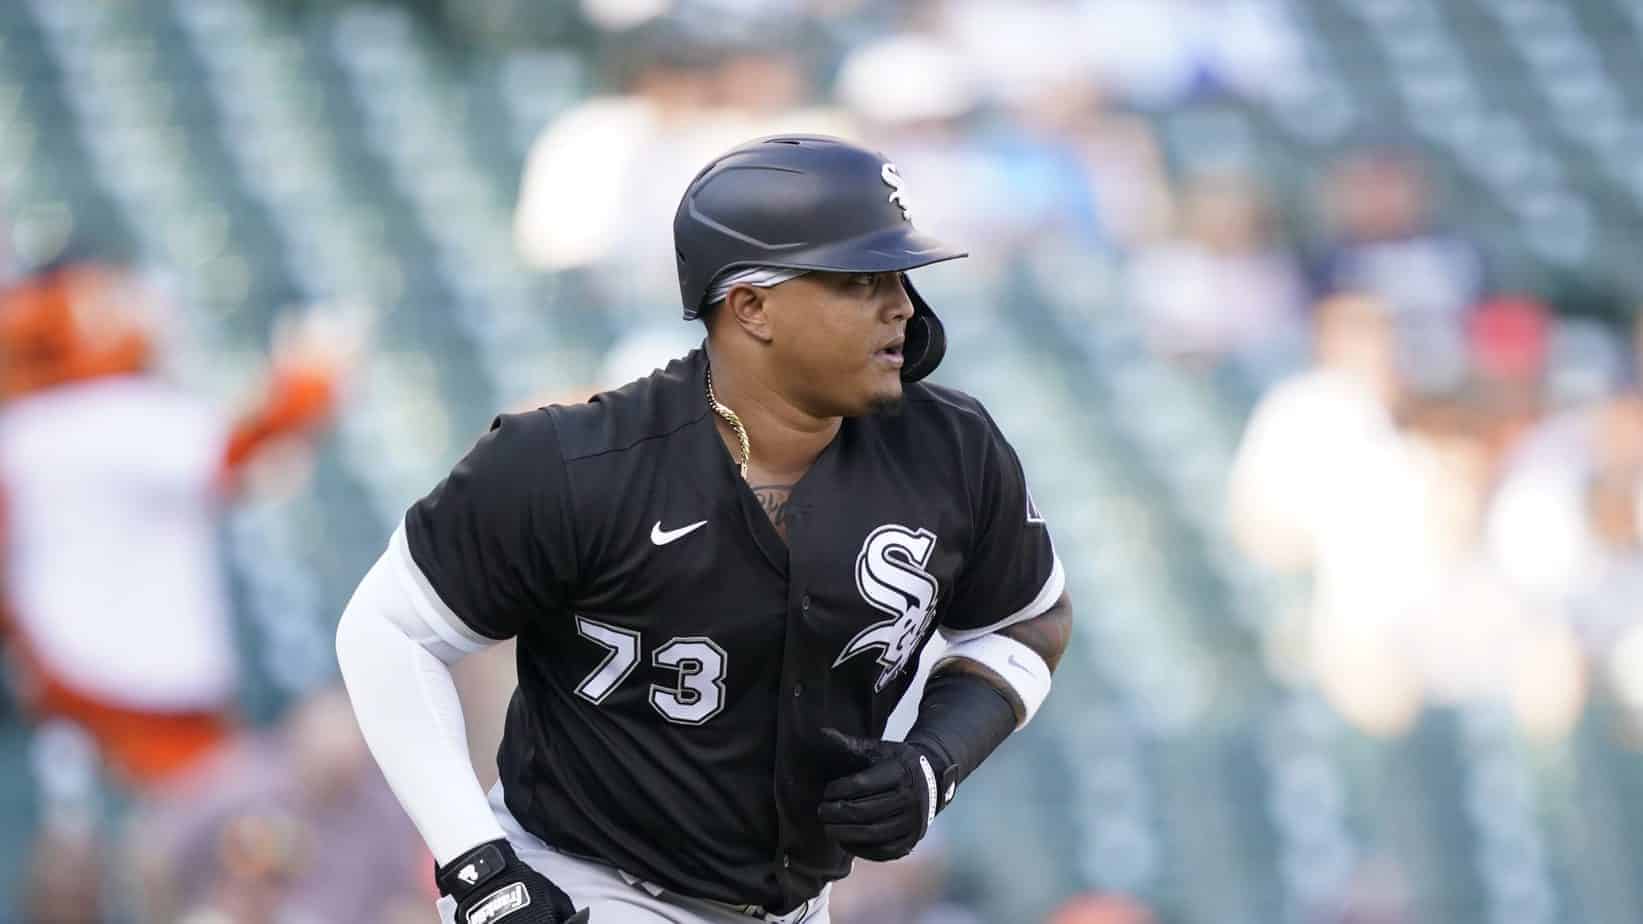 Despite a cryptic social media announcement on Wednesday night, it would appear that Chicago White Sox slugger Yermin Mercedes has not retired